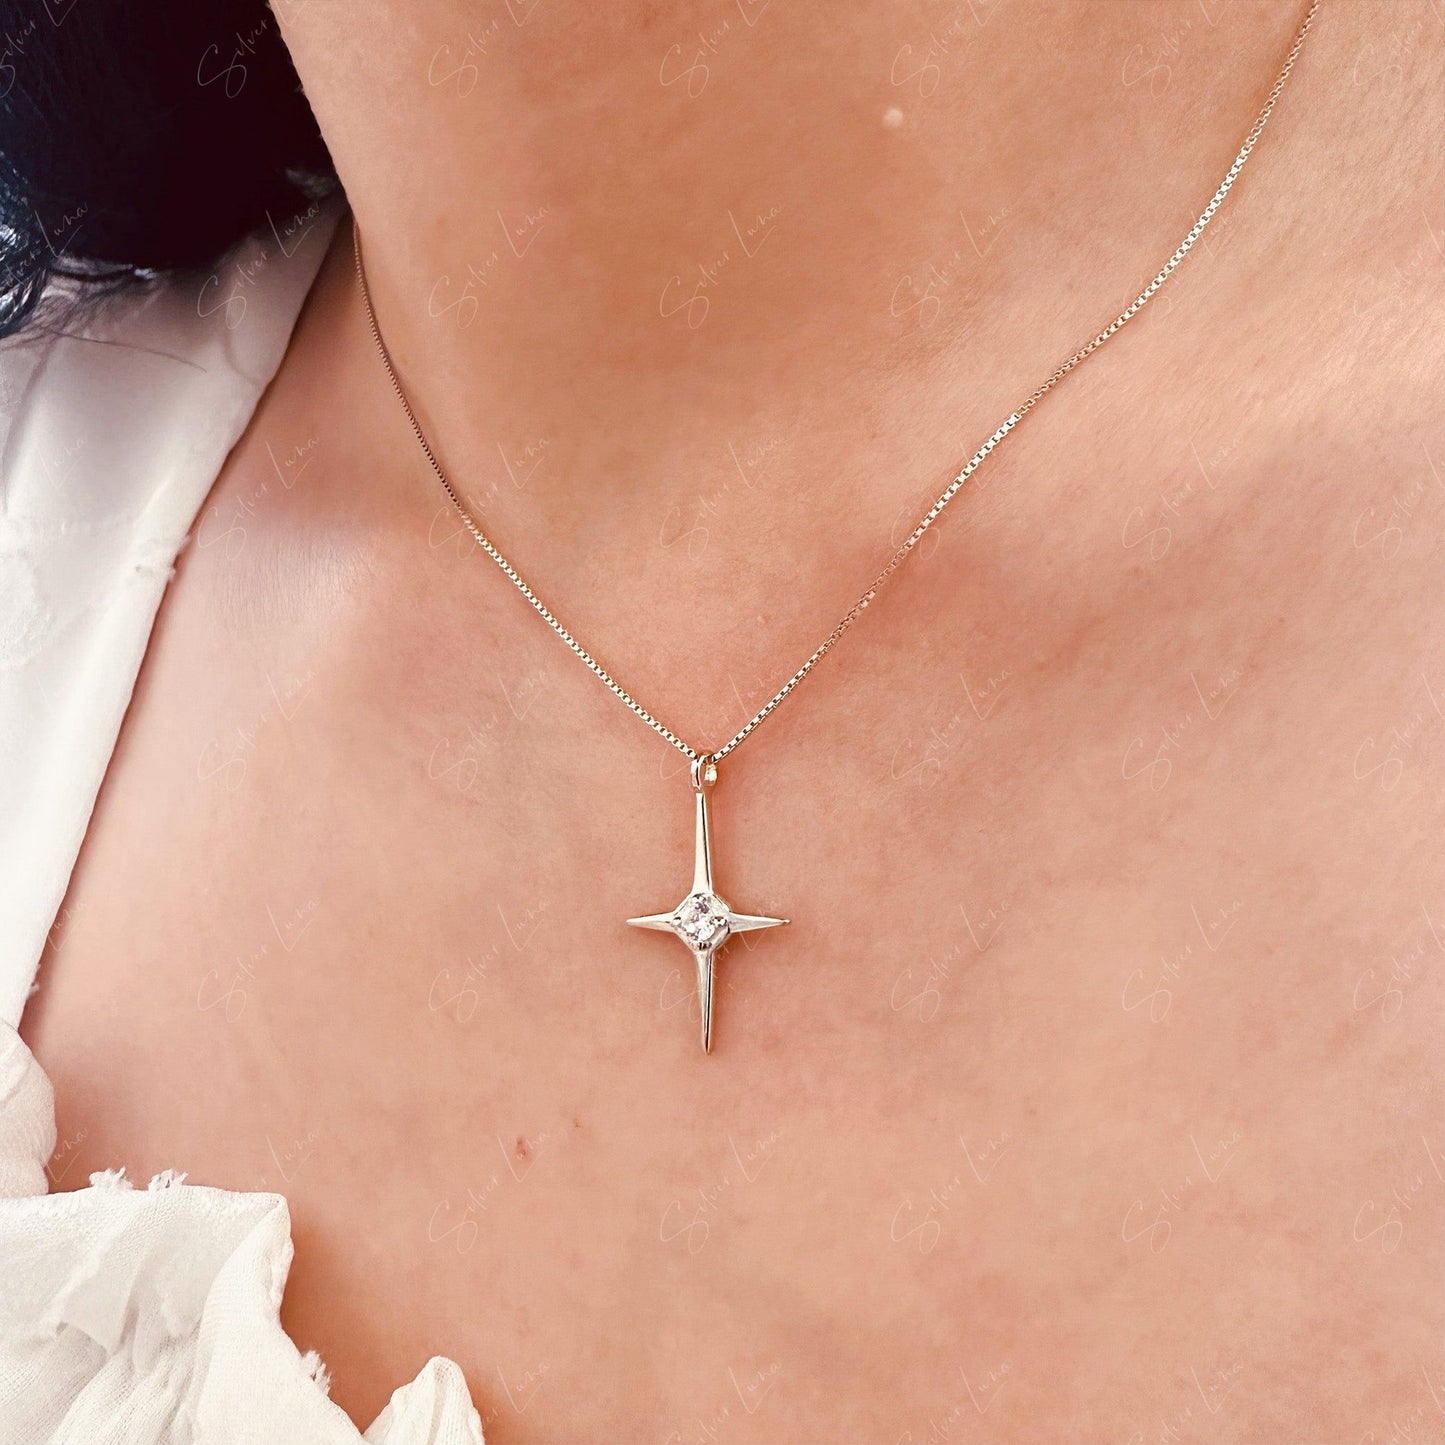 Simple star pendant silver necklace